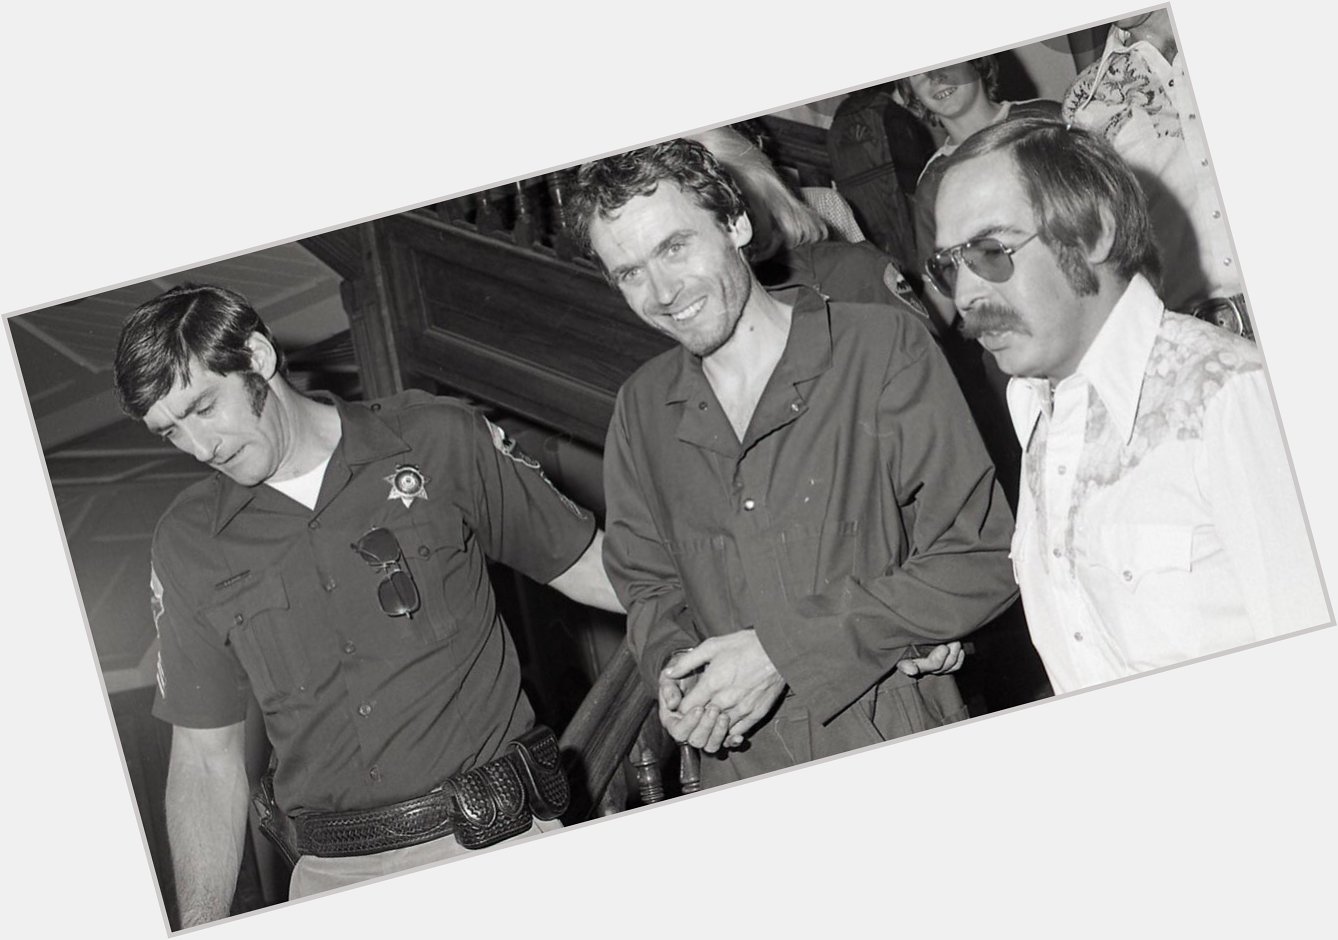 Happy birthday to the infamous Ted Bundy, he would ve been in his 70s! 